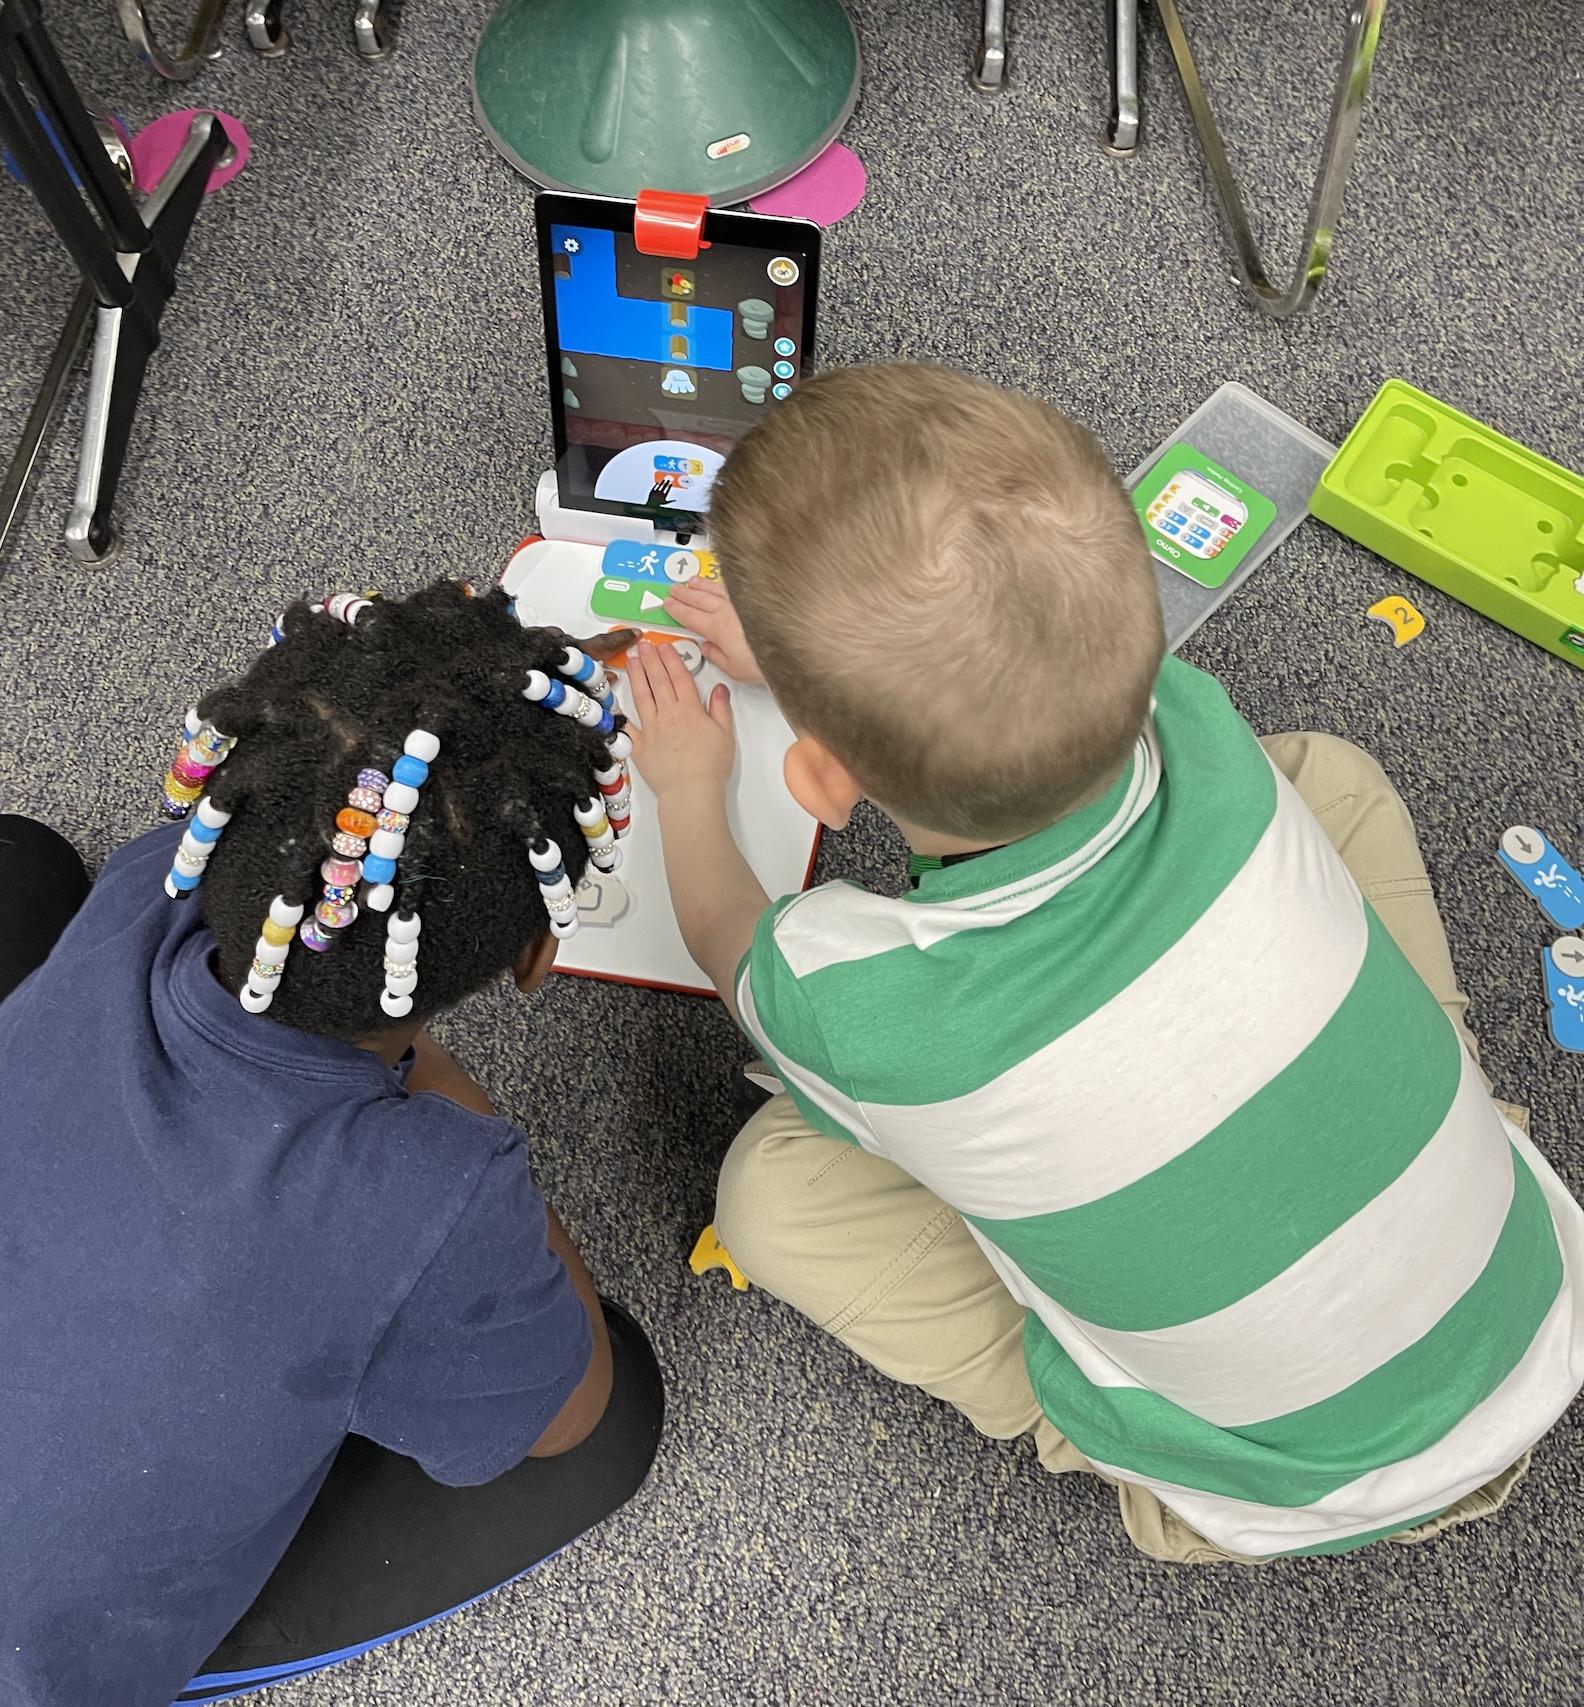 First-graders Michael Huber and Logan Fitzroy practice coding using Osmo tiles and a new ipad